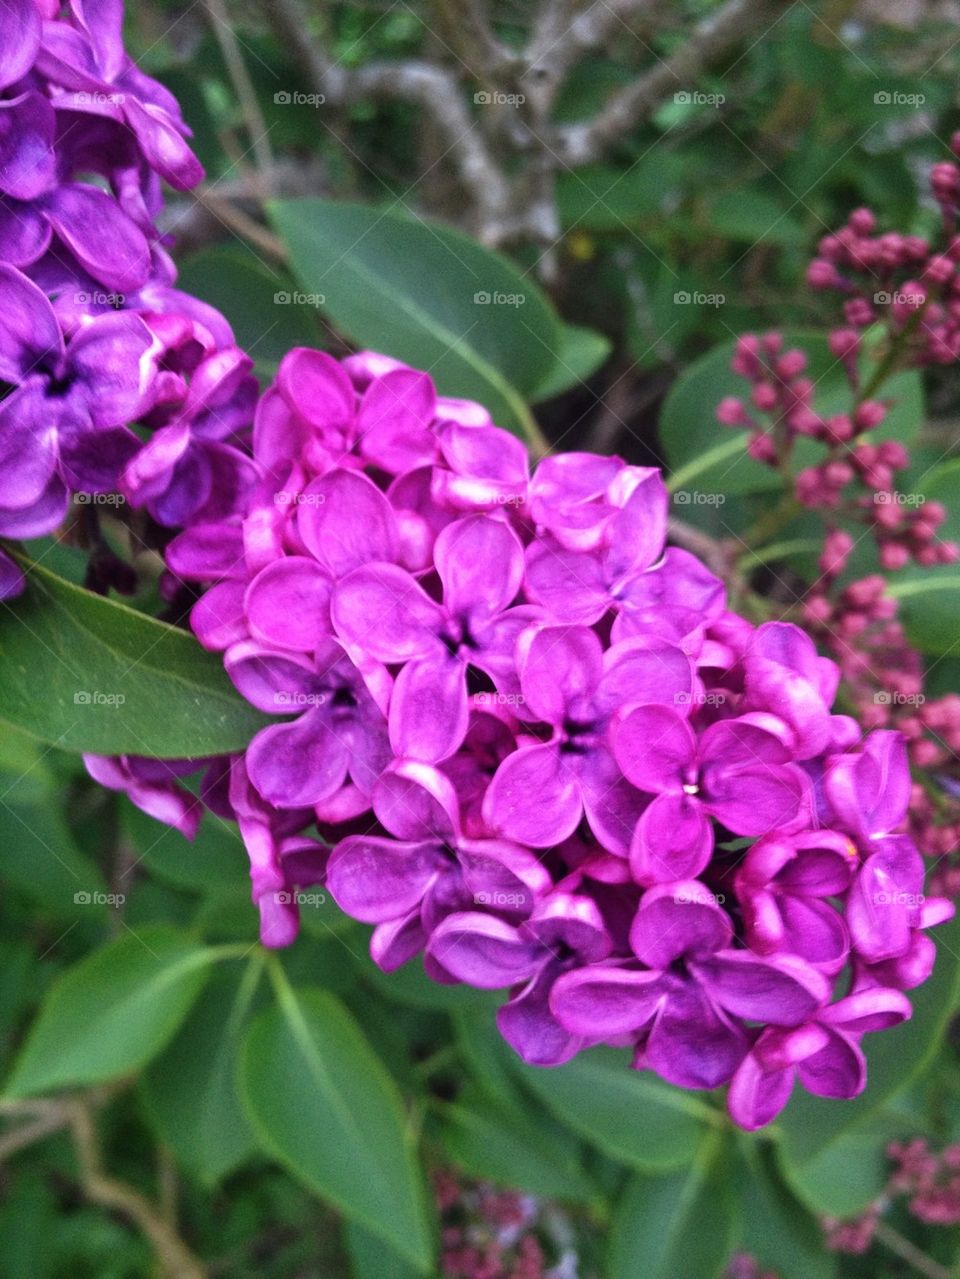 Lilac flowers in flowers